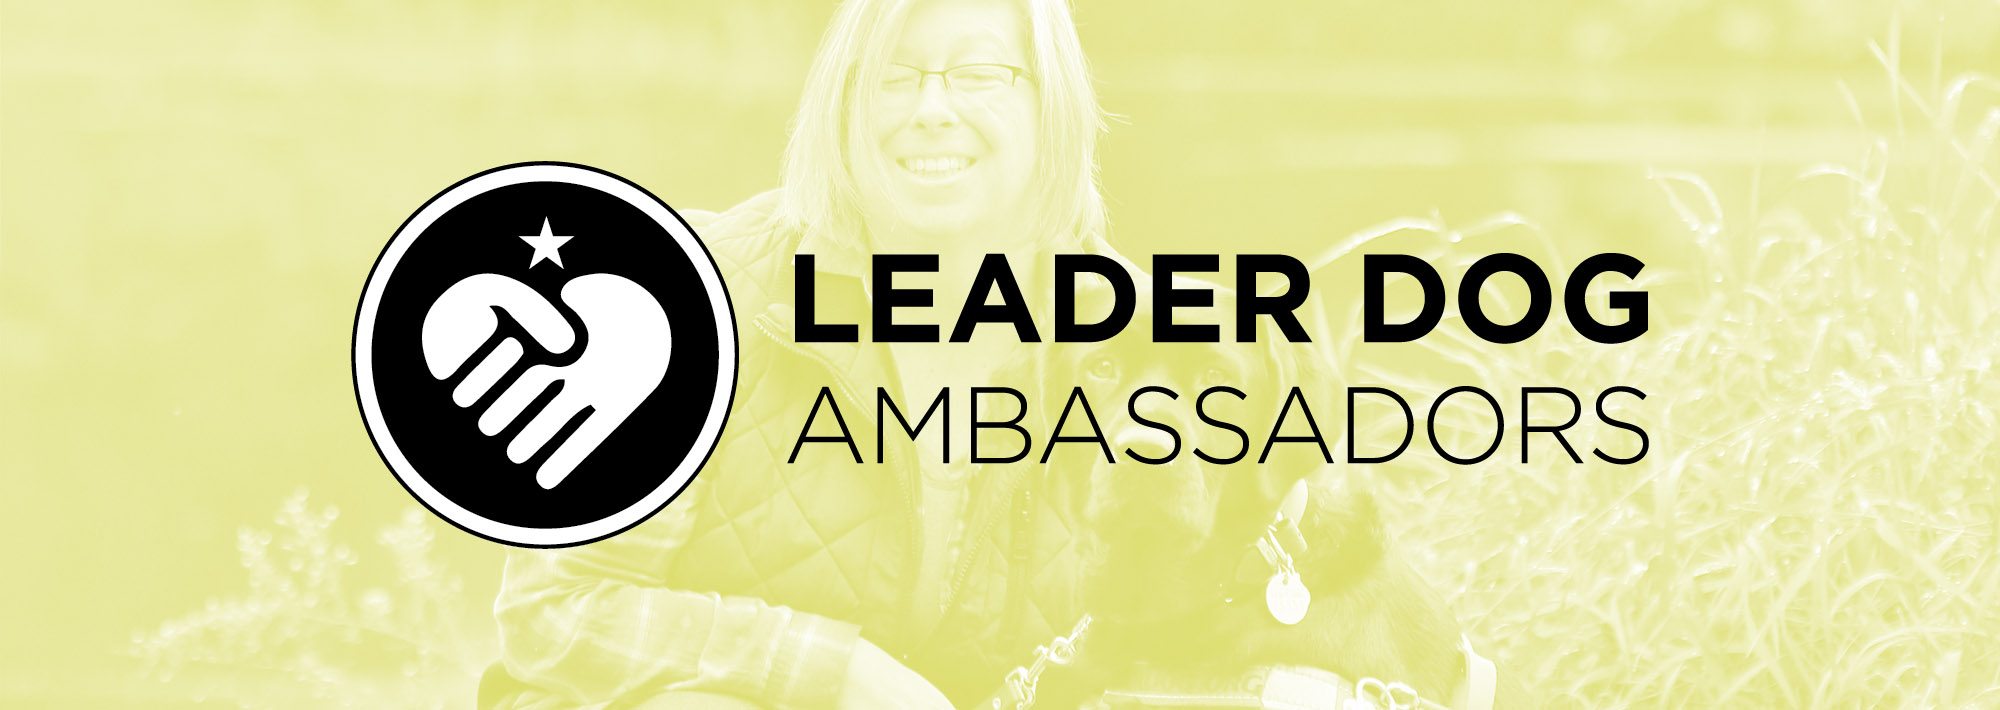 Light green colored image of a woman smiling and kneeling next to a black lab in harness. Over the image are the words Leader Dog Ambassadors with a circle icon of folded hands in a heart shape